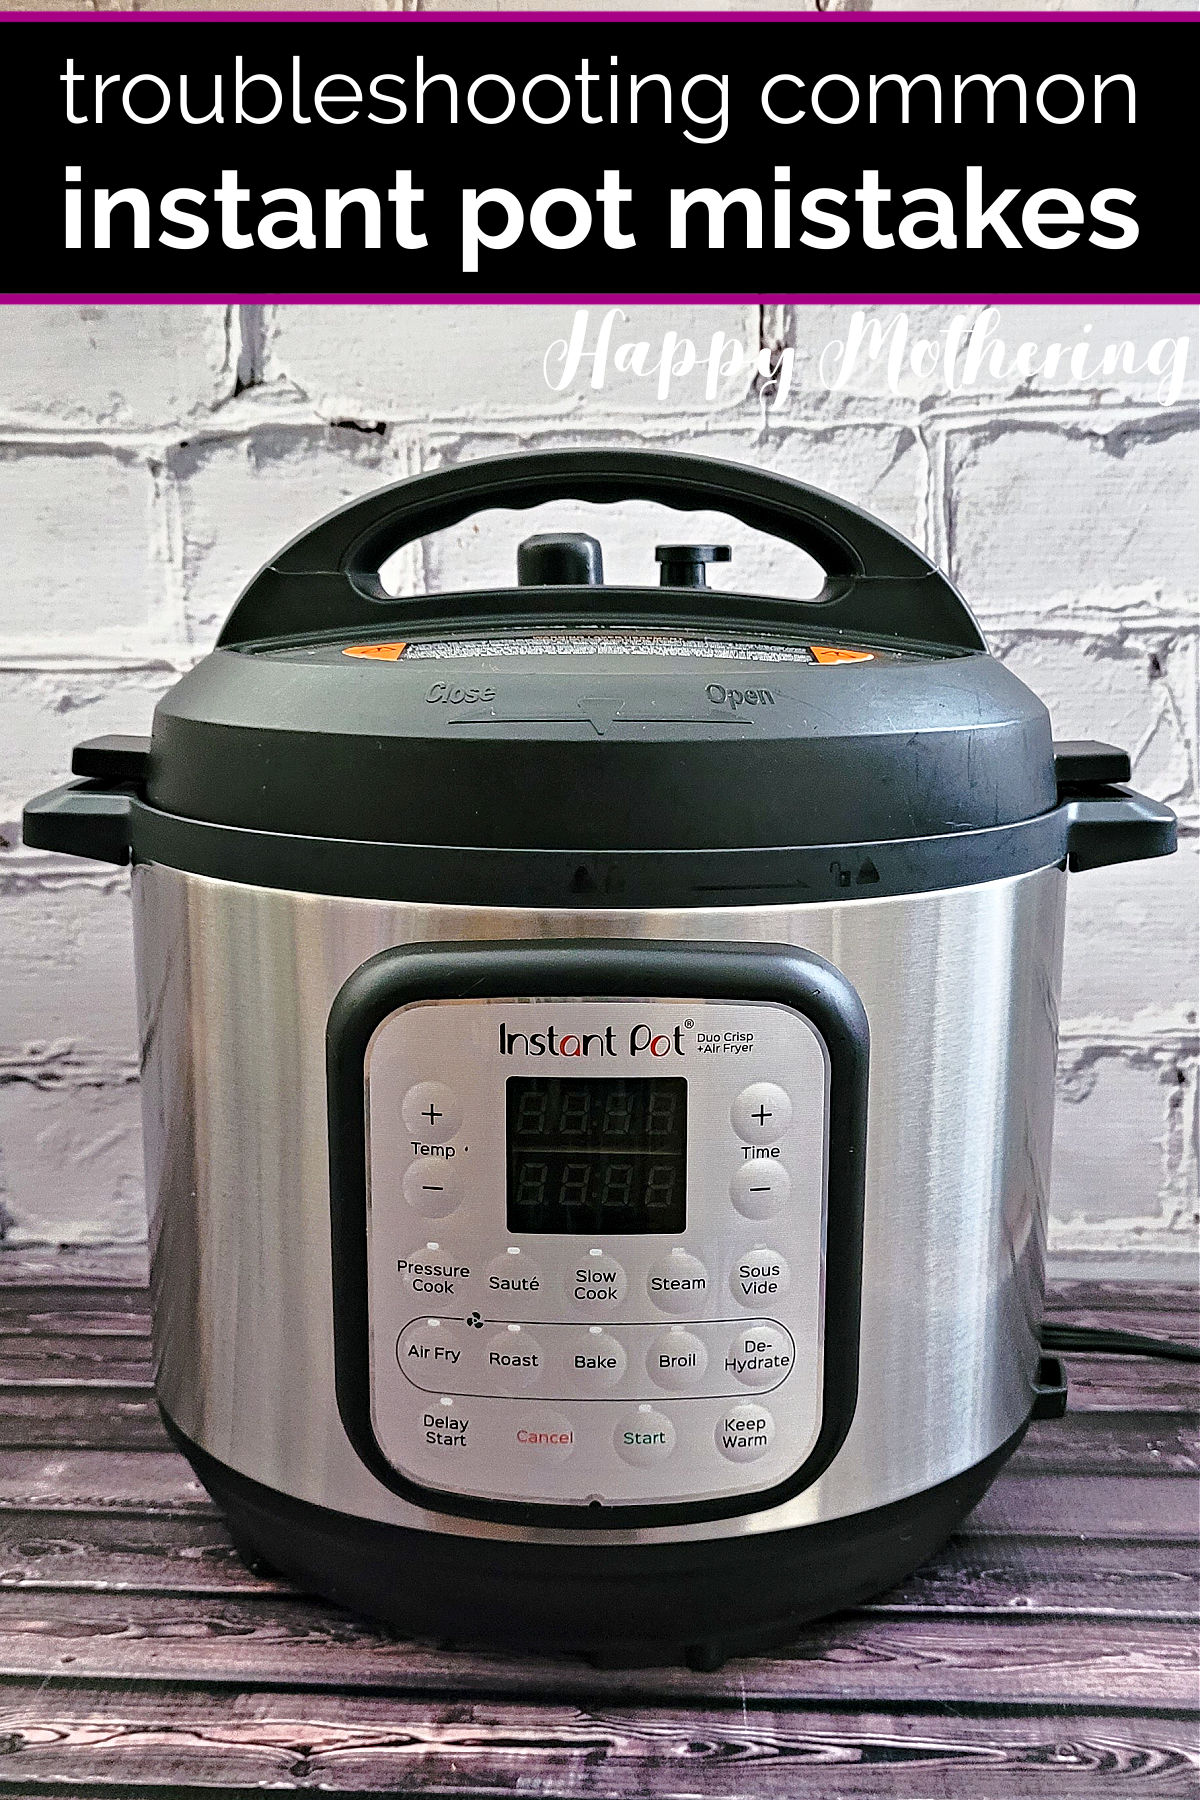 Instant Pot set for 15 minutes with a label about making mistakes